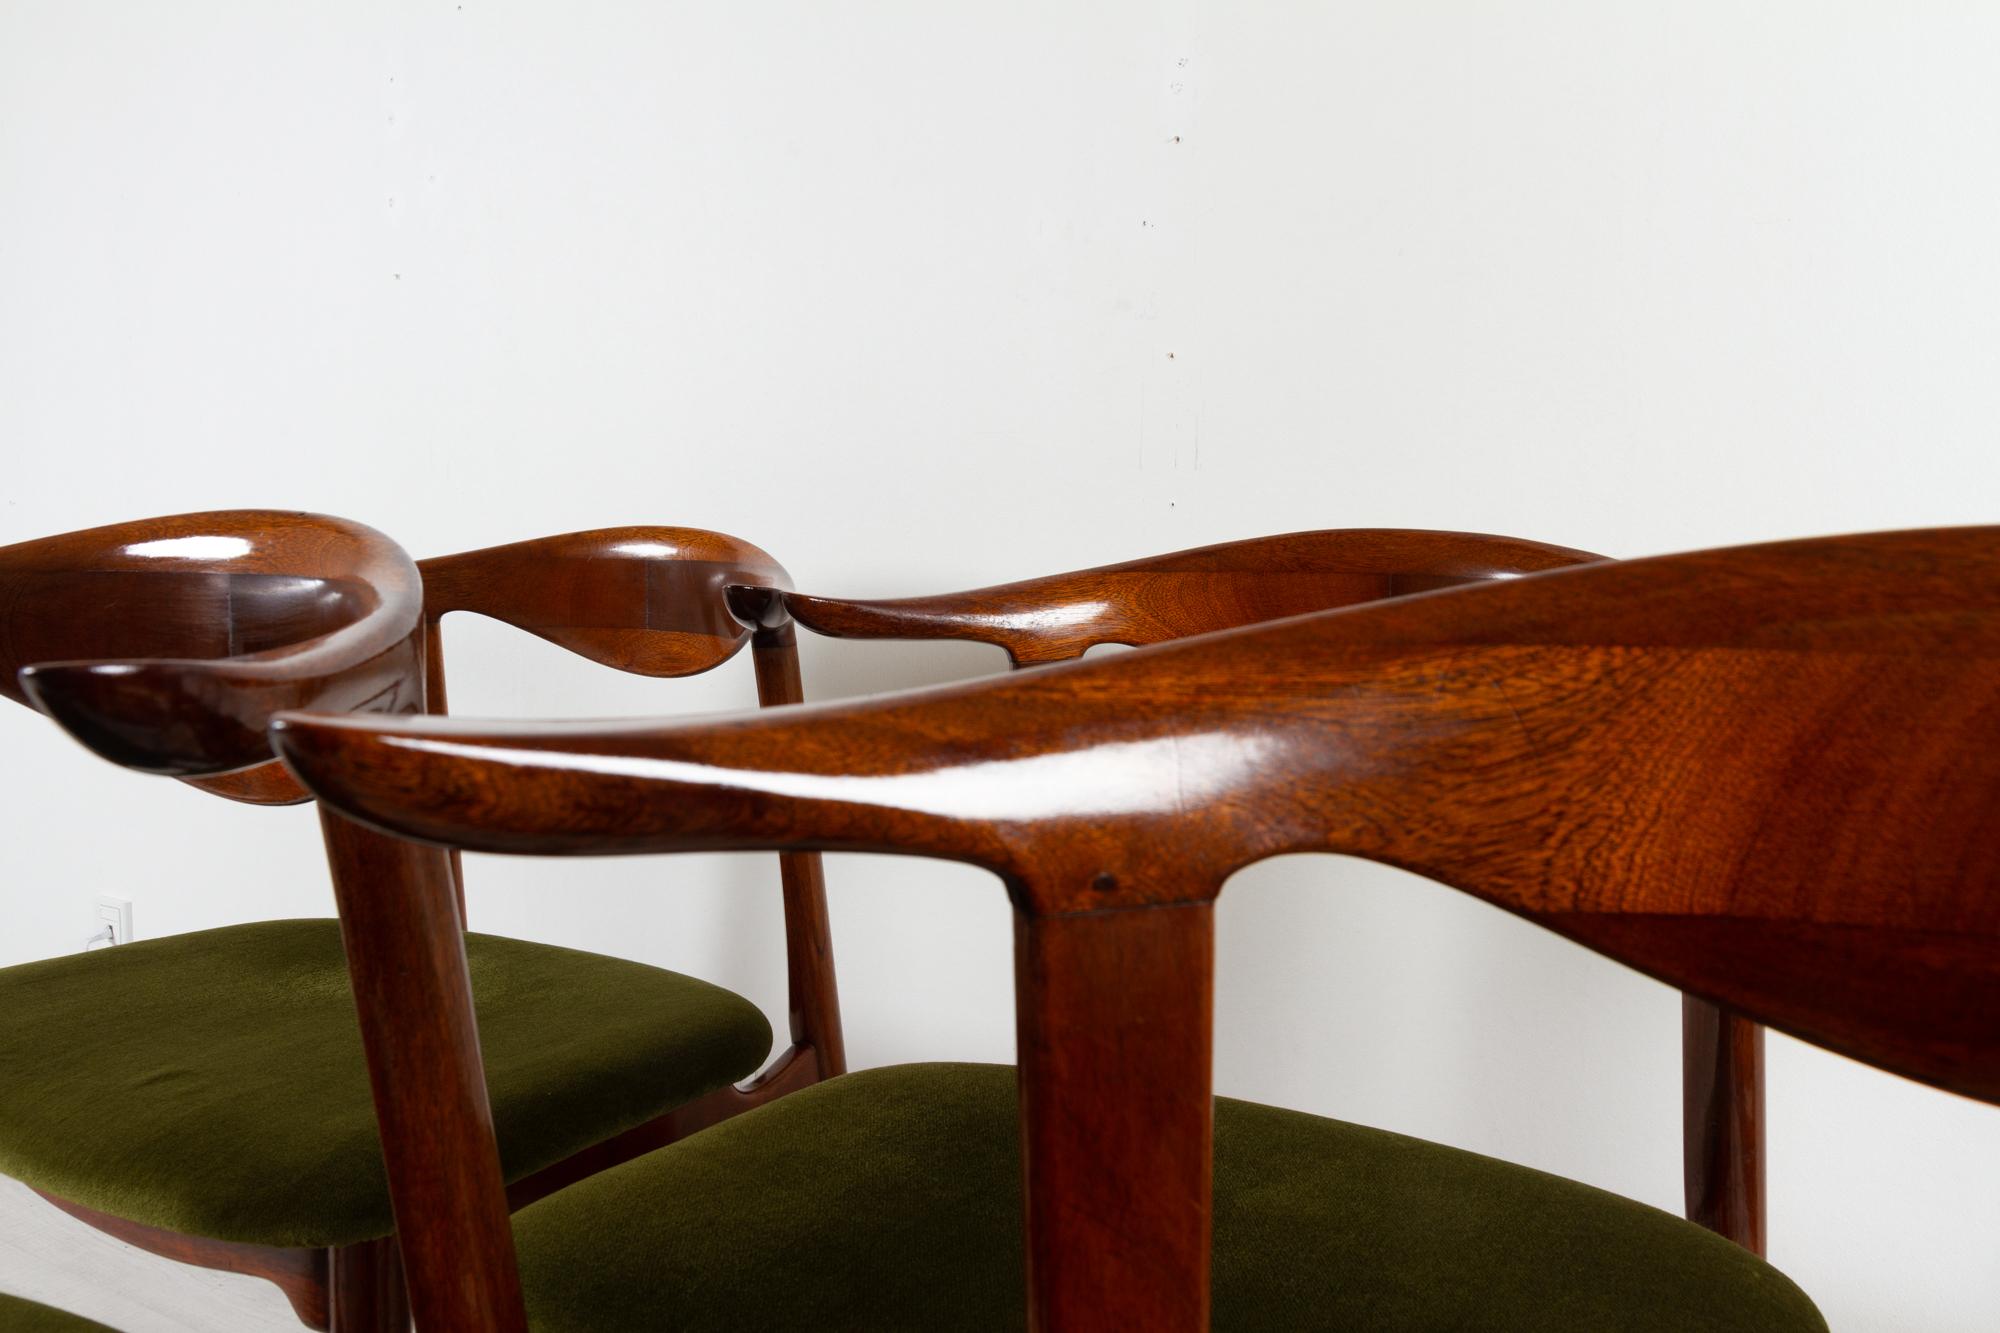 Vintage Danish Mahogany Cowhorn Chairs 1940s, Set of 6 For Sale 12